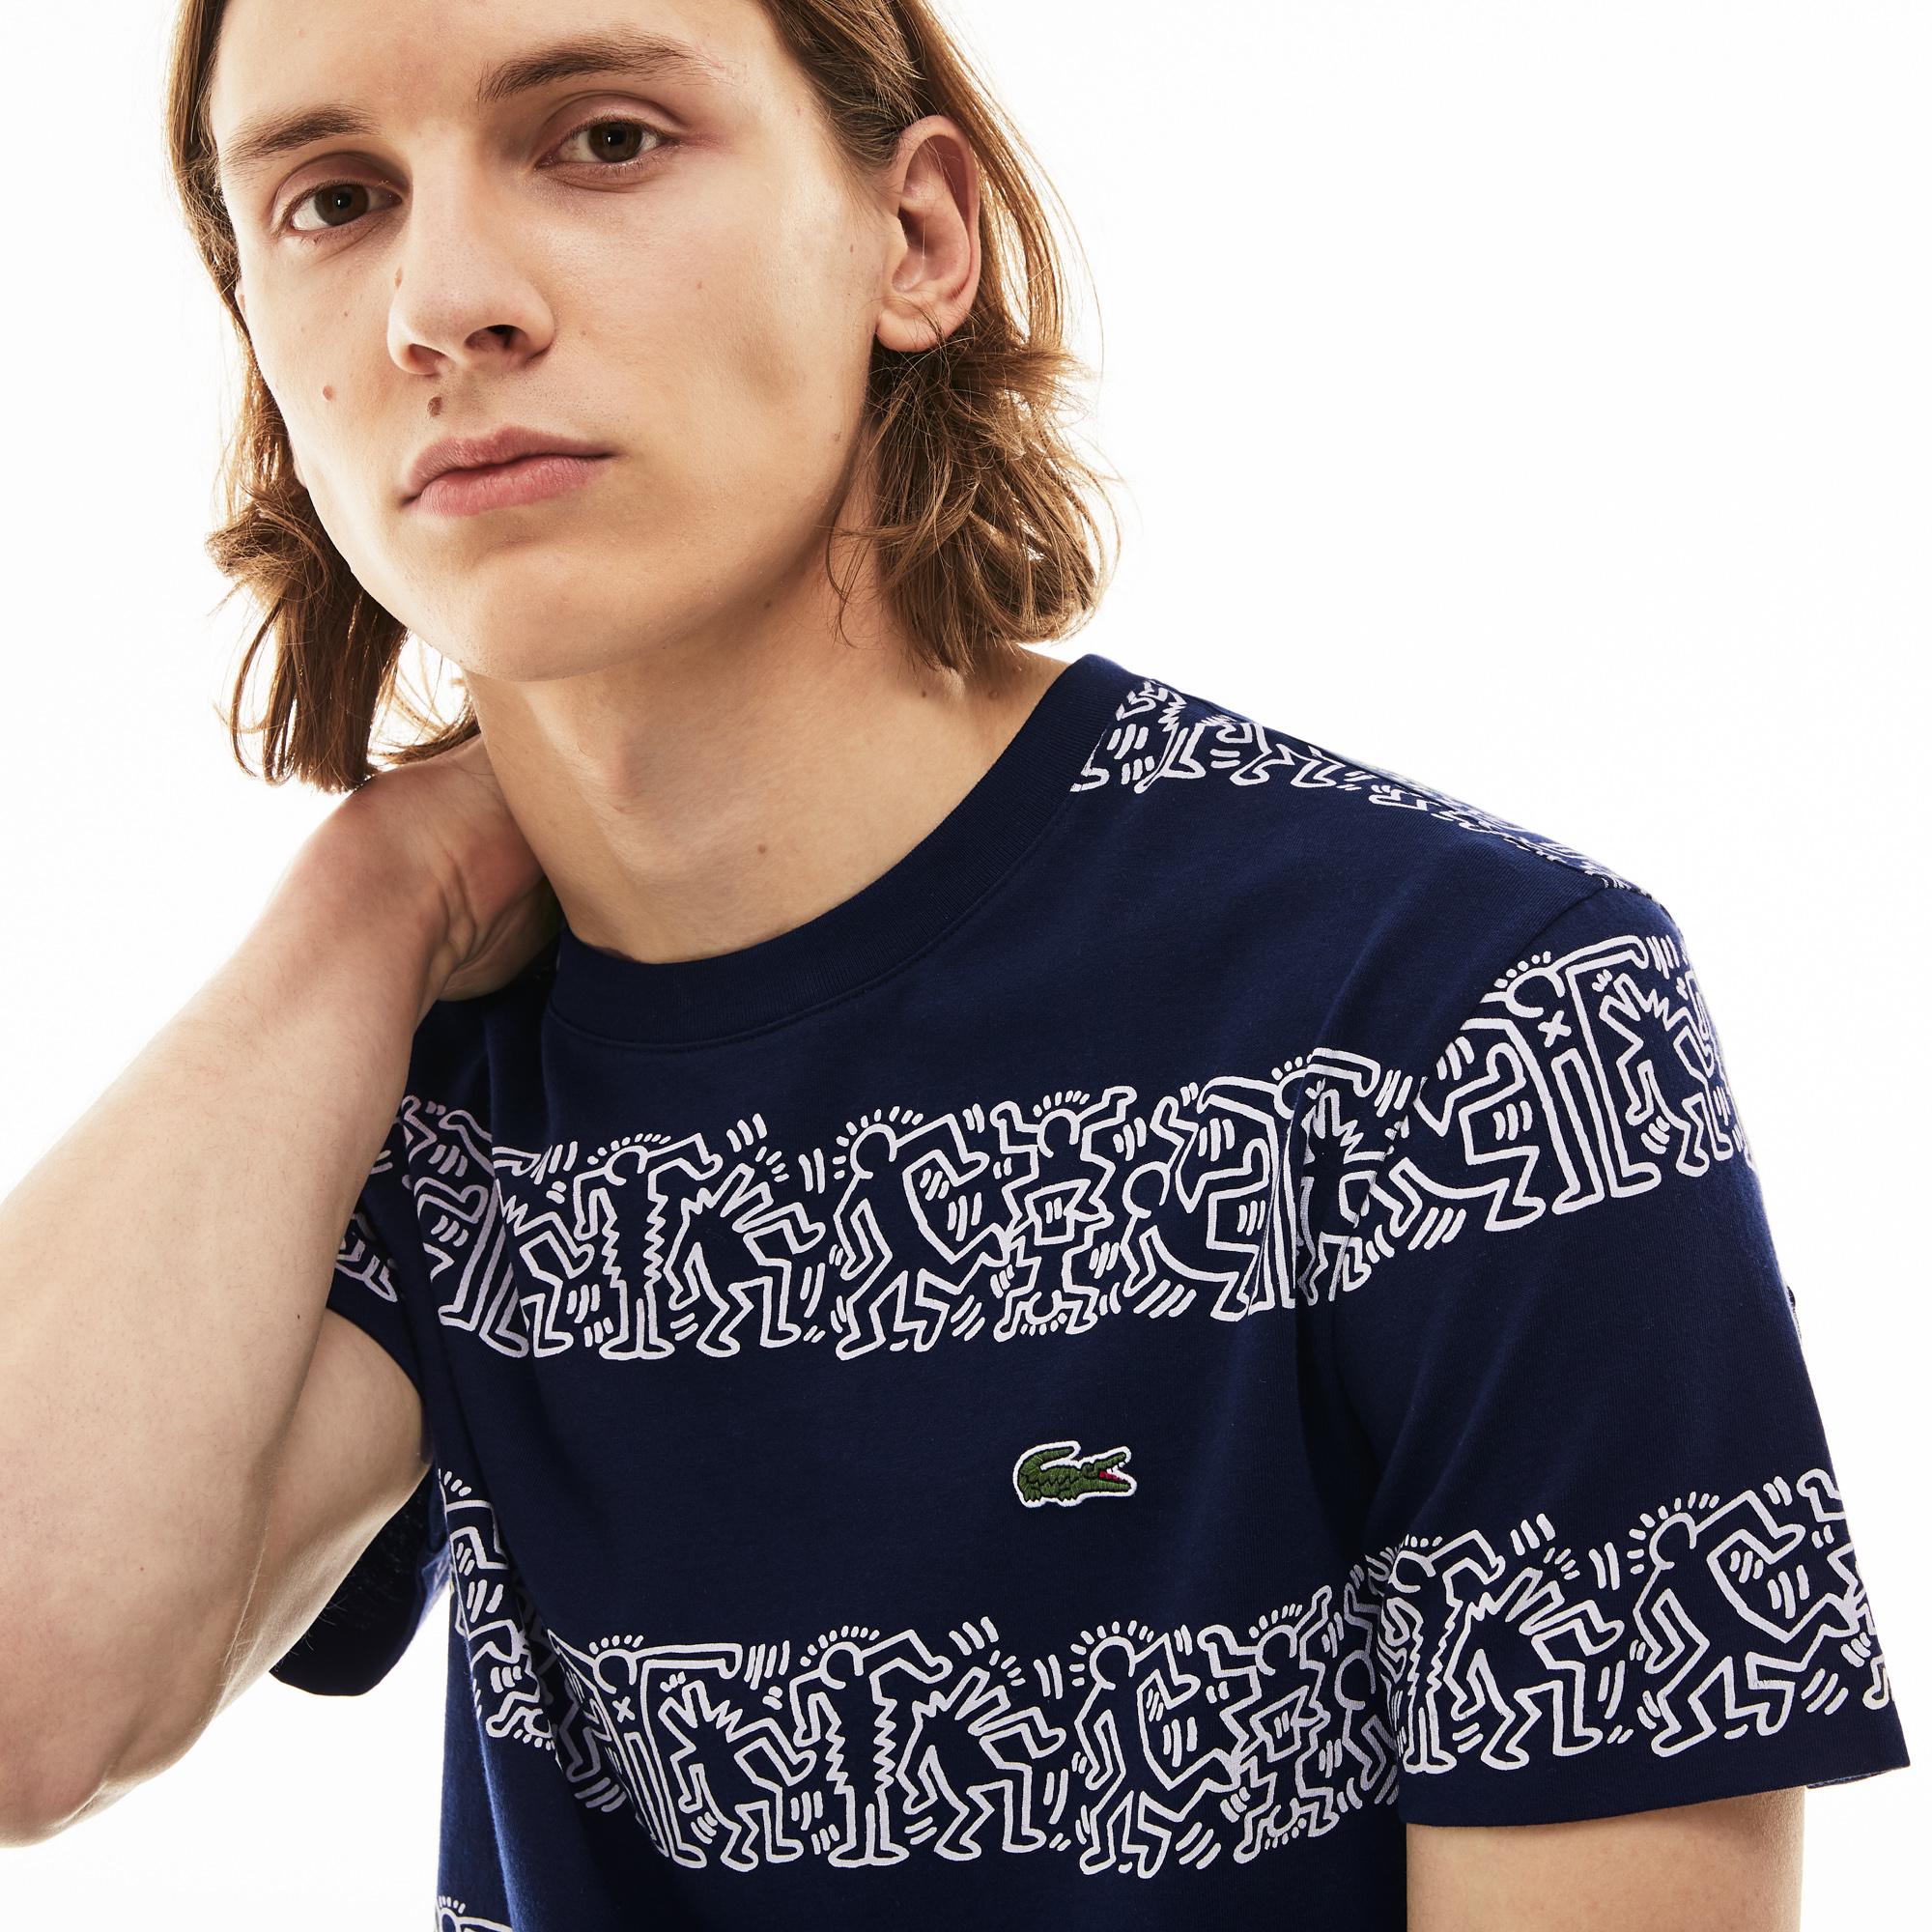 Keith Haring X Lacoste Collaboration Details Hypebeast | vlr.eng.br